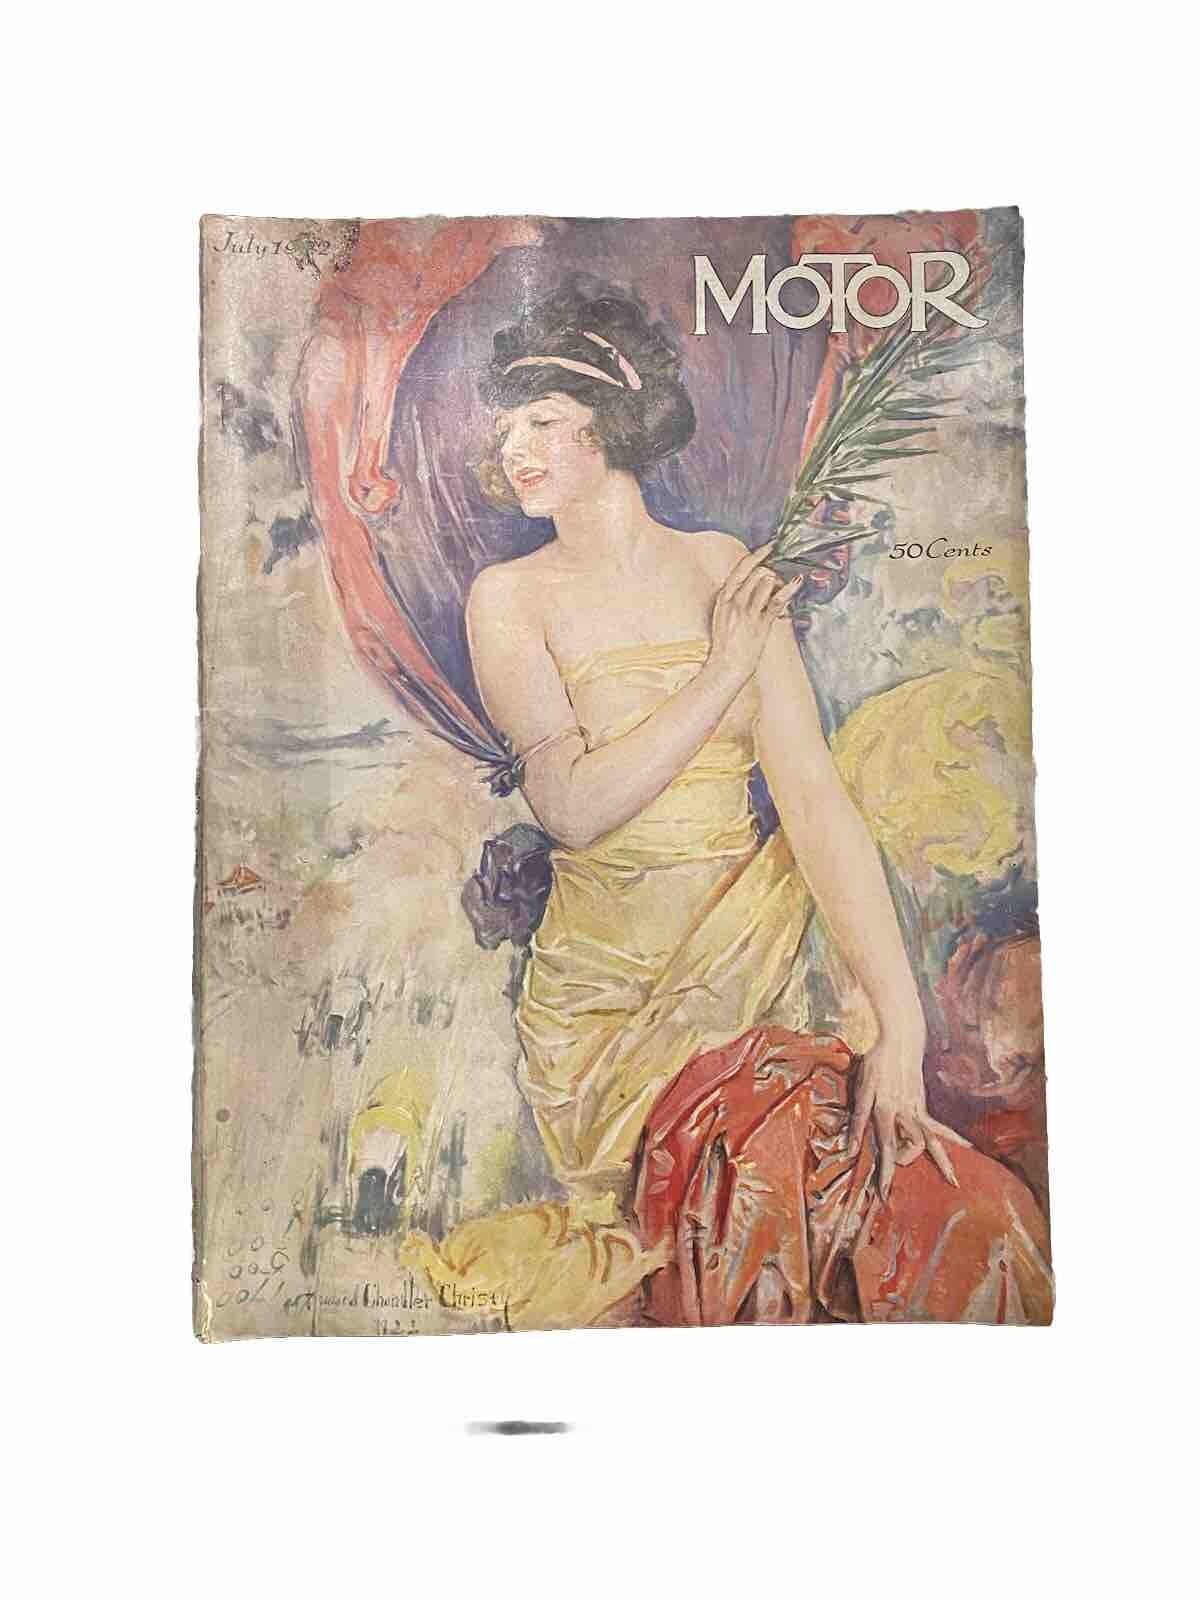 MoToR MAGAZINE July 1922-RARE ANTIQUE COLLECTABLE-COVER ART BY H.C. Christy